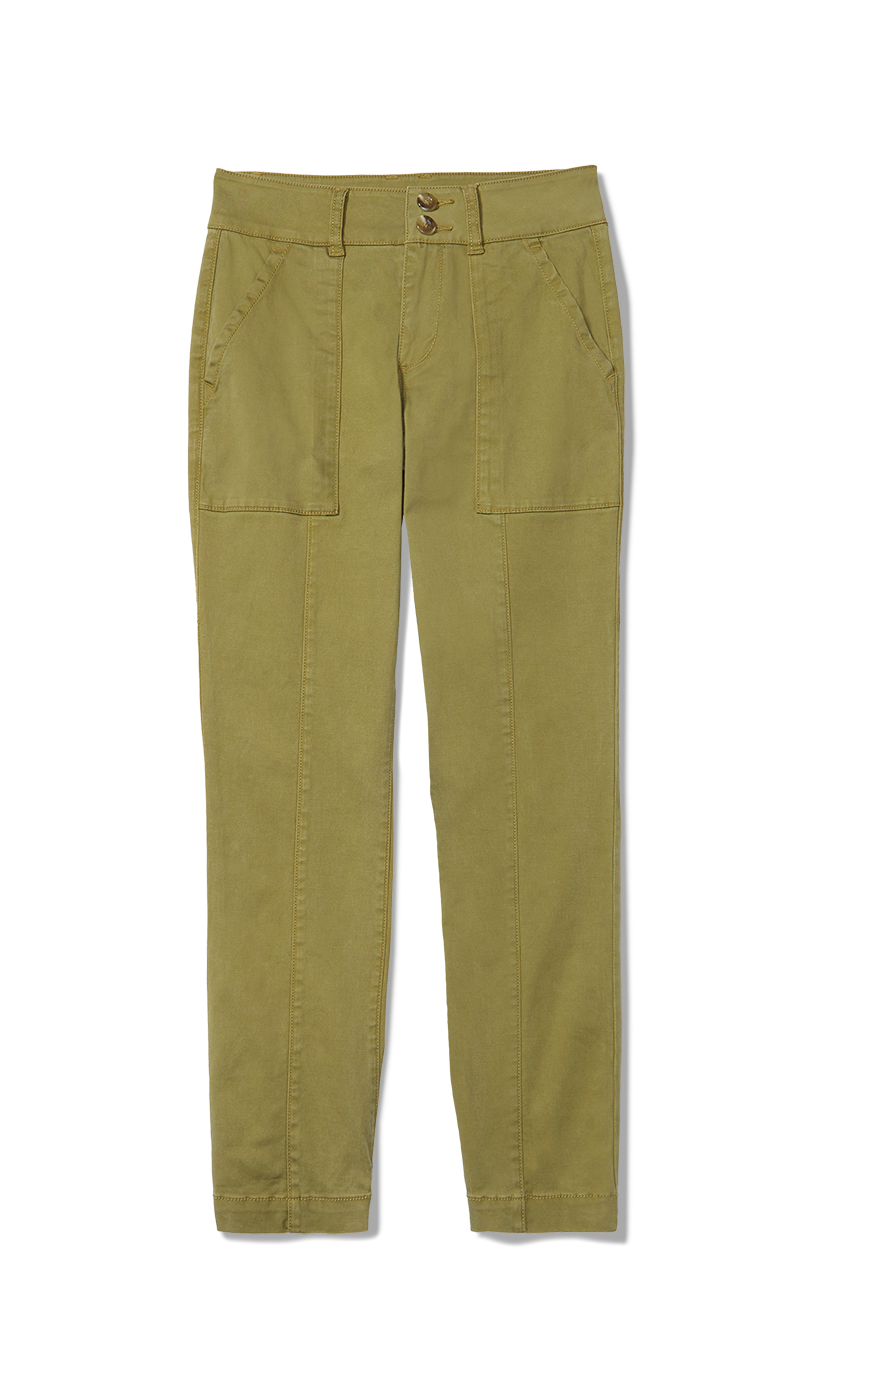 Women's Trousers - Linen, Ponte, Suiting